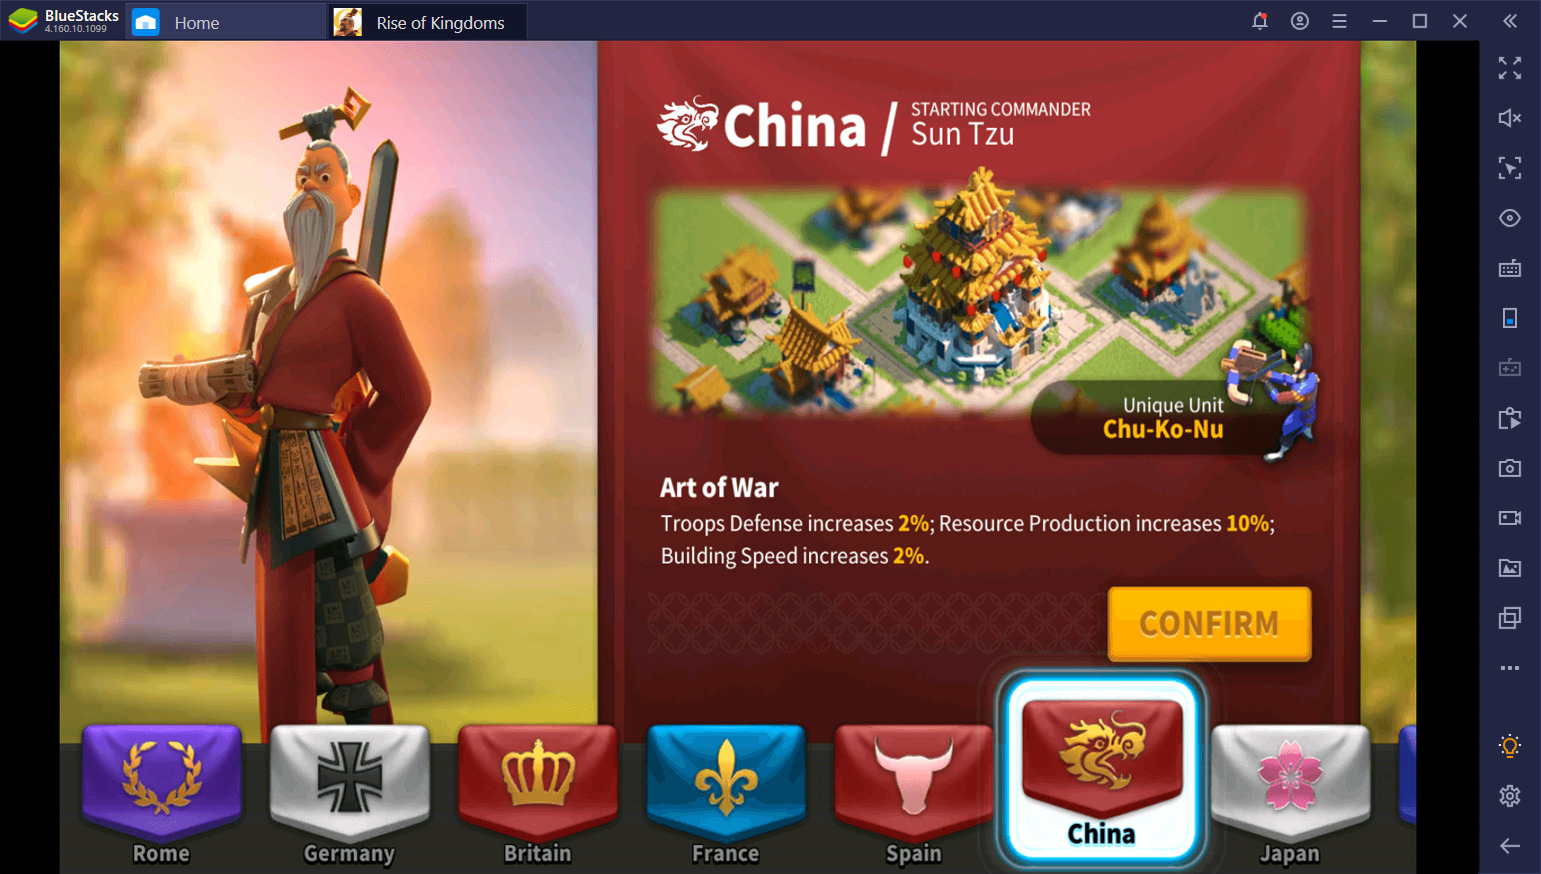 The Ultimate Guide to Choosing the Best Civilization in Rise of Kingdoms